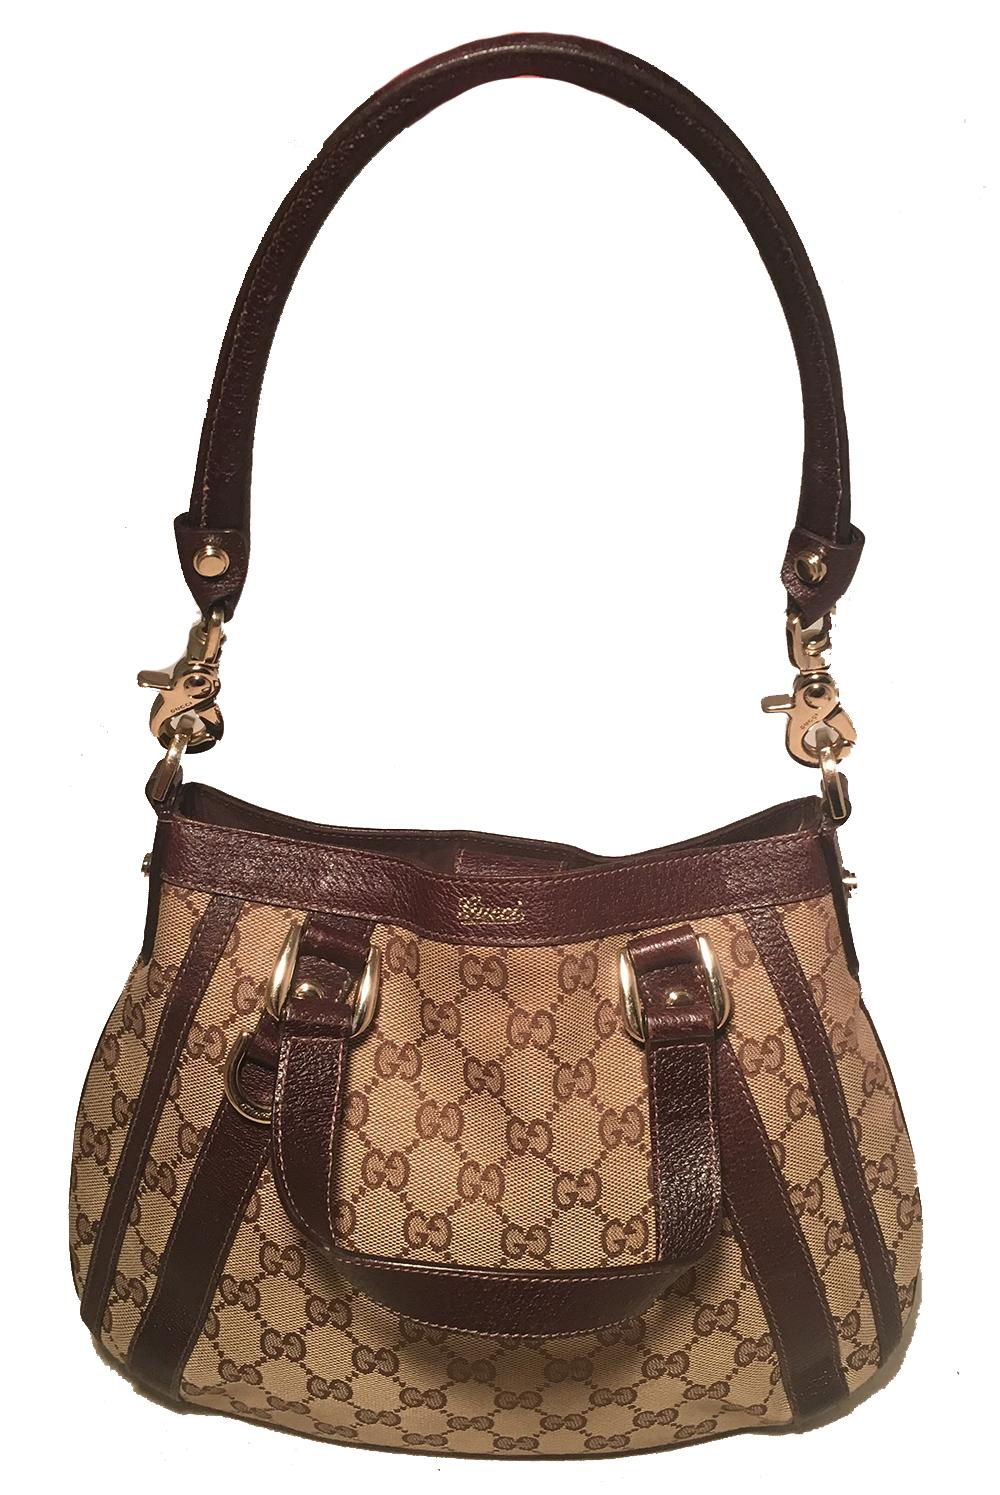 Gucci Monogram Canvas and Brown Leather Small Shoulder Handbag in excellent condition. Signature monogram gucci canvas trimmed with dark brown leather and gold hardware. Double top leather handles and a removable matching leather short shoulder